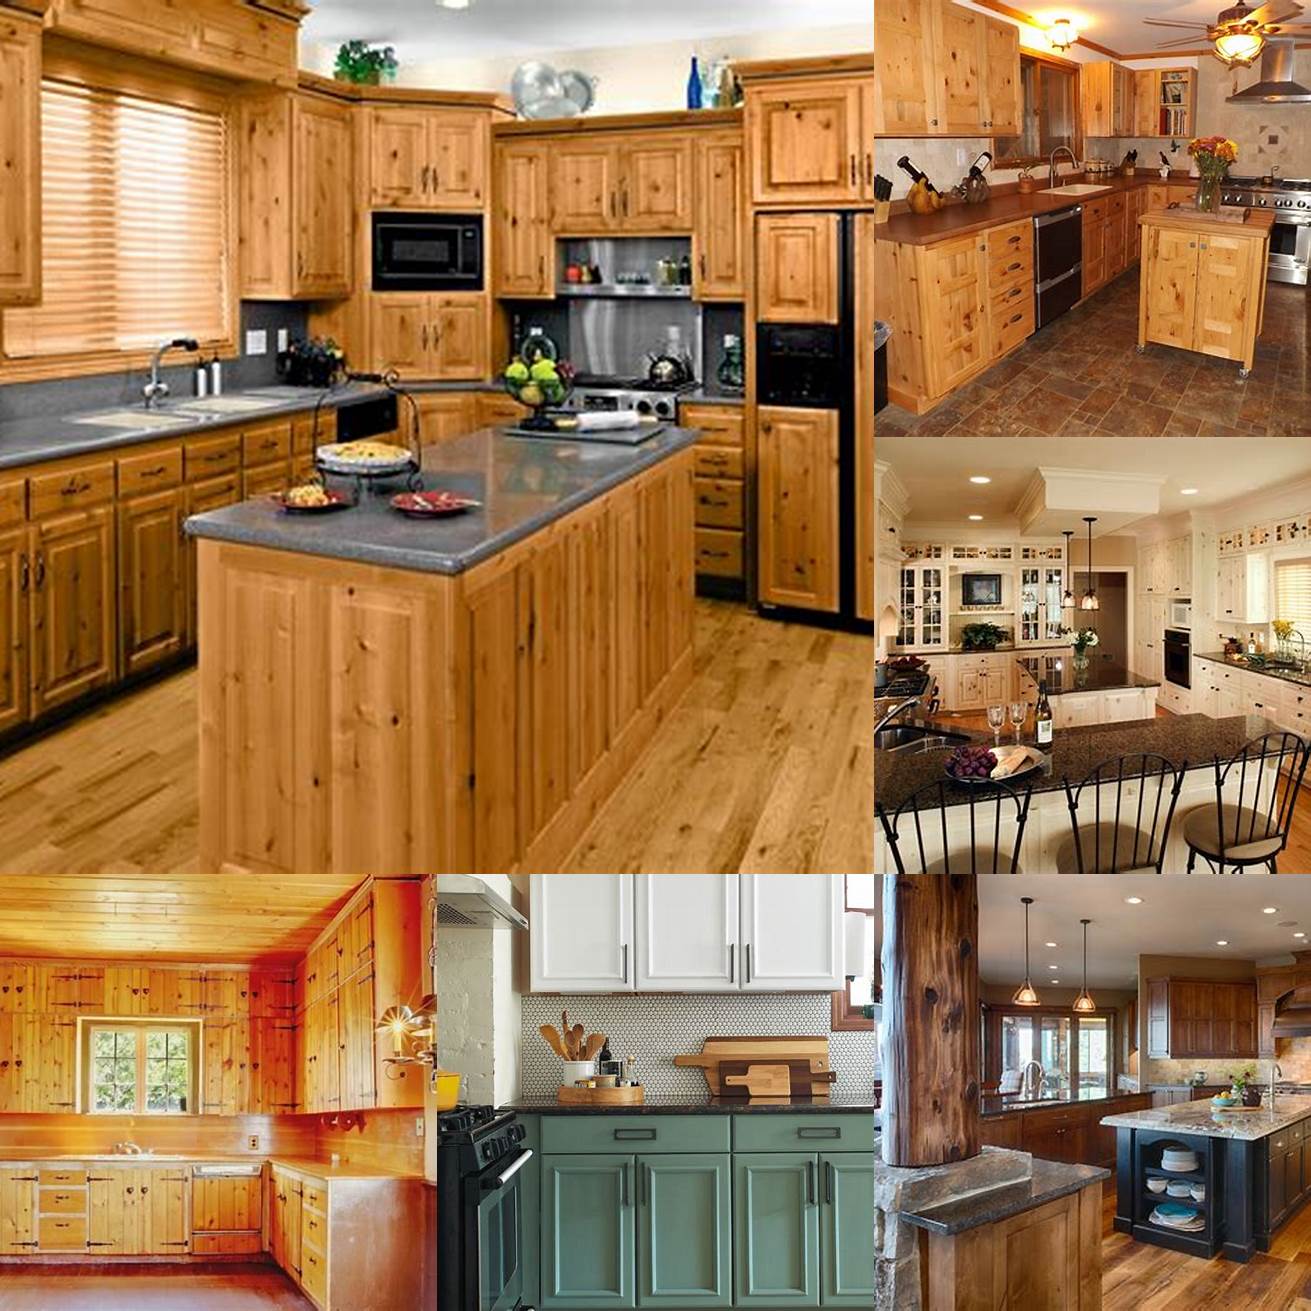 If youre not ready to commit to an entire kitchen full of pine cabinets consider using them as an accent on an island or feature wall